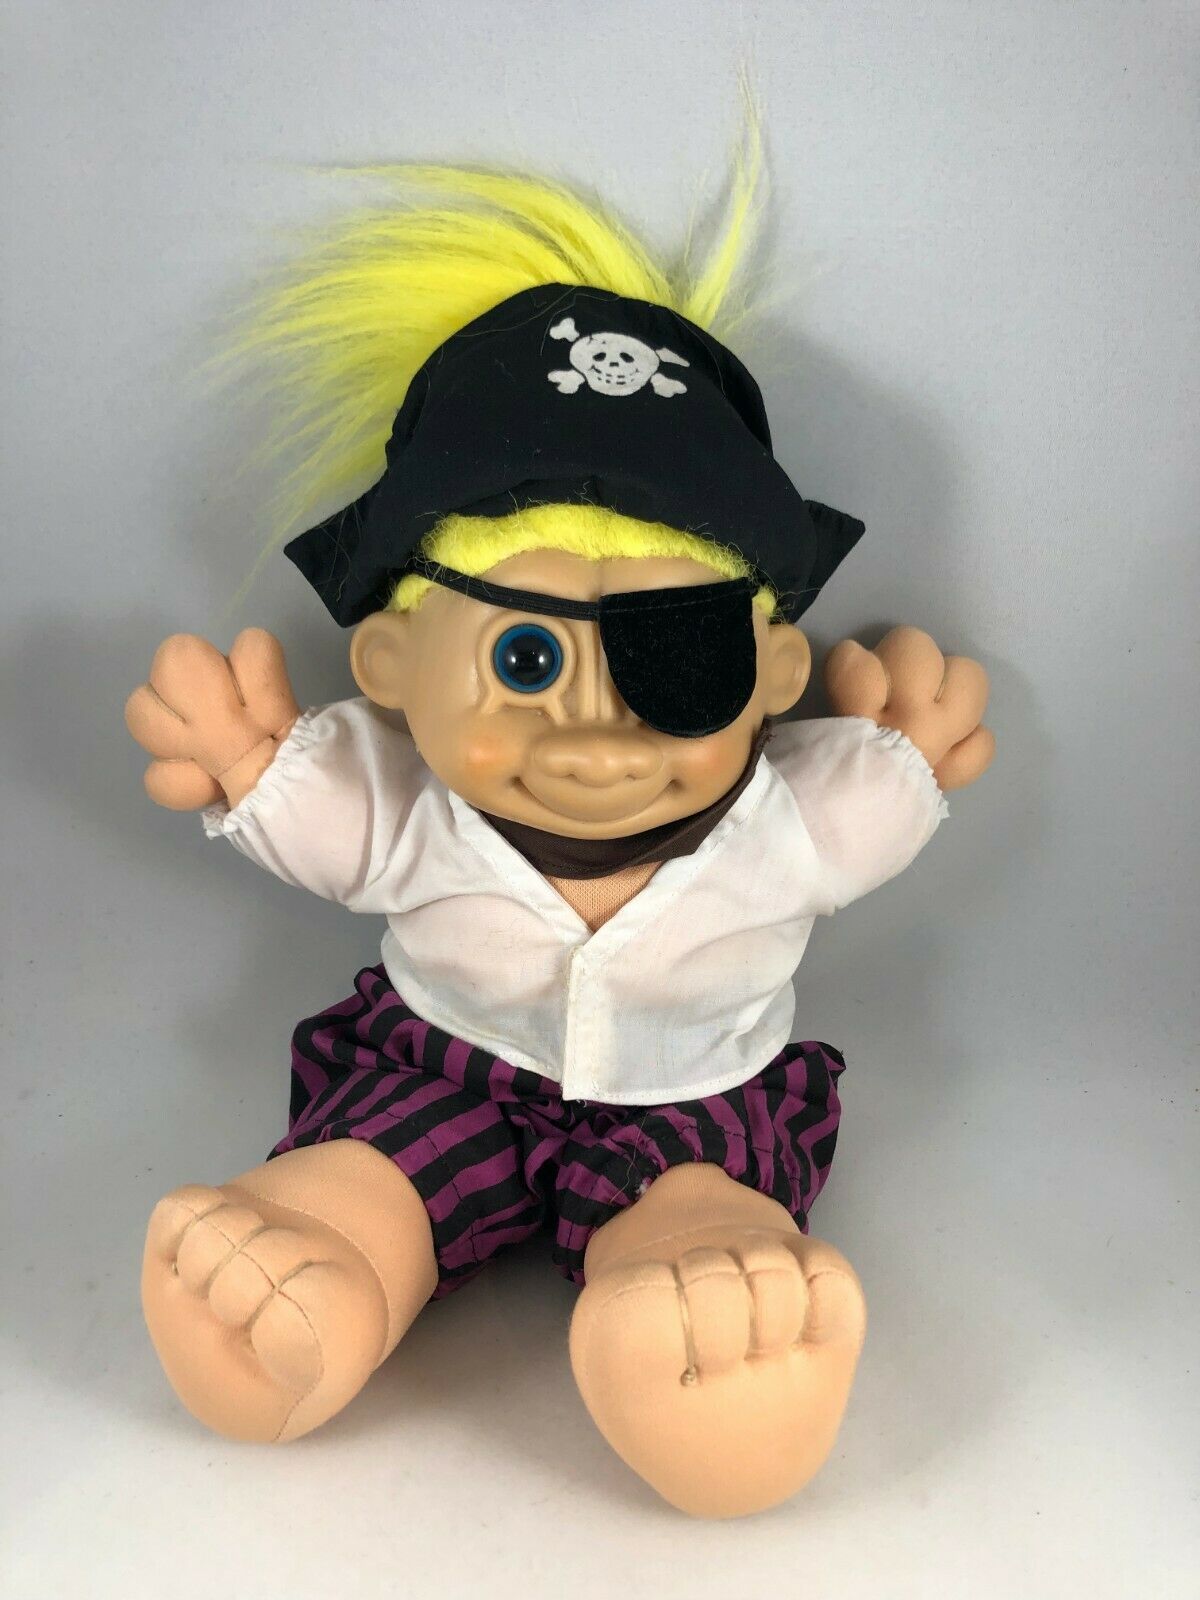 Russ Soft Body Troll 12in. Pirate Yellow Hair Blue Eyes Patch Vintage 90s - $19.00